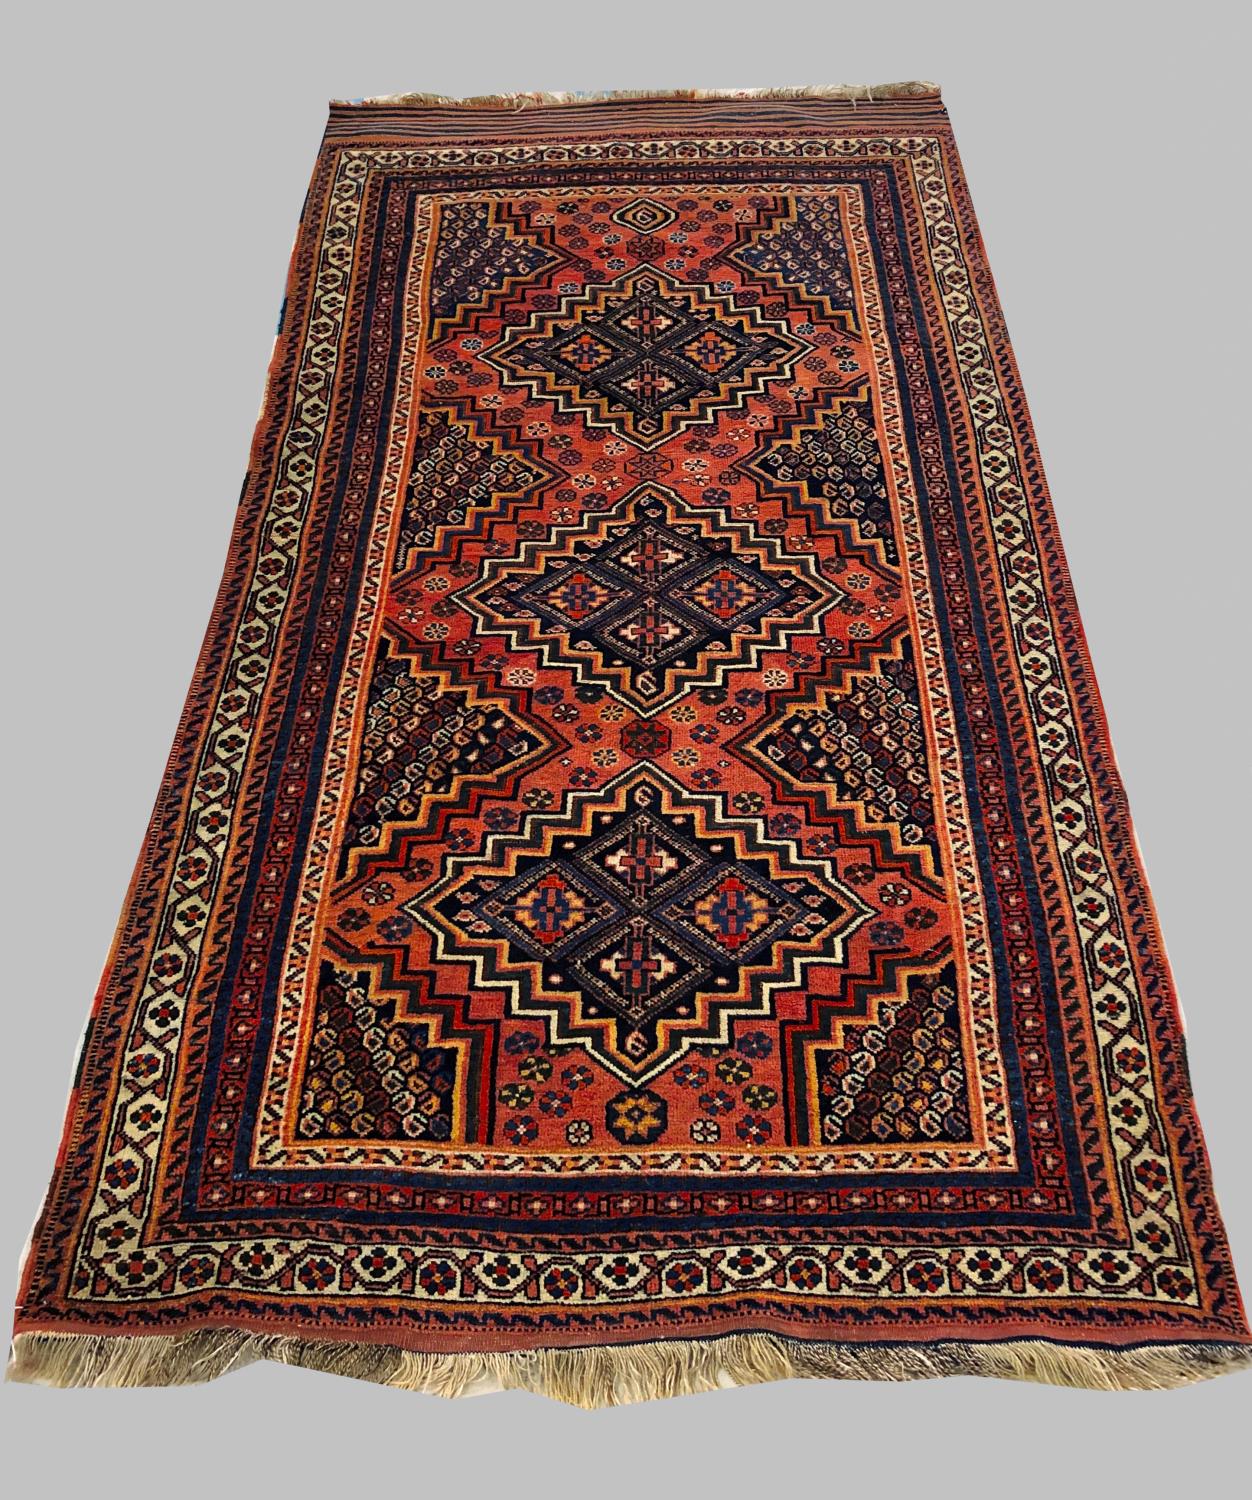 AN AFSHAR RUG, c.1910, South East Iran, the pale brick red field with three stepped indigo